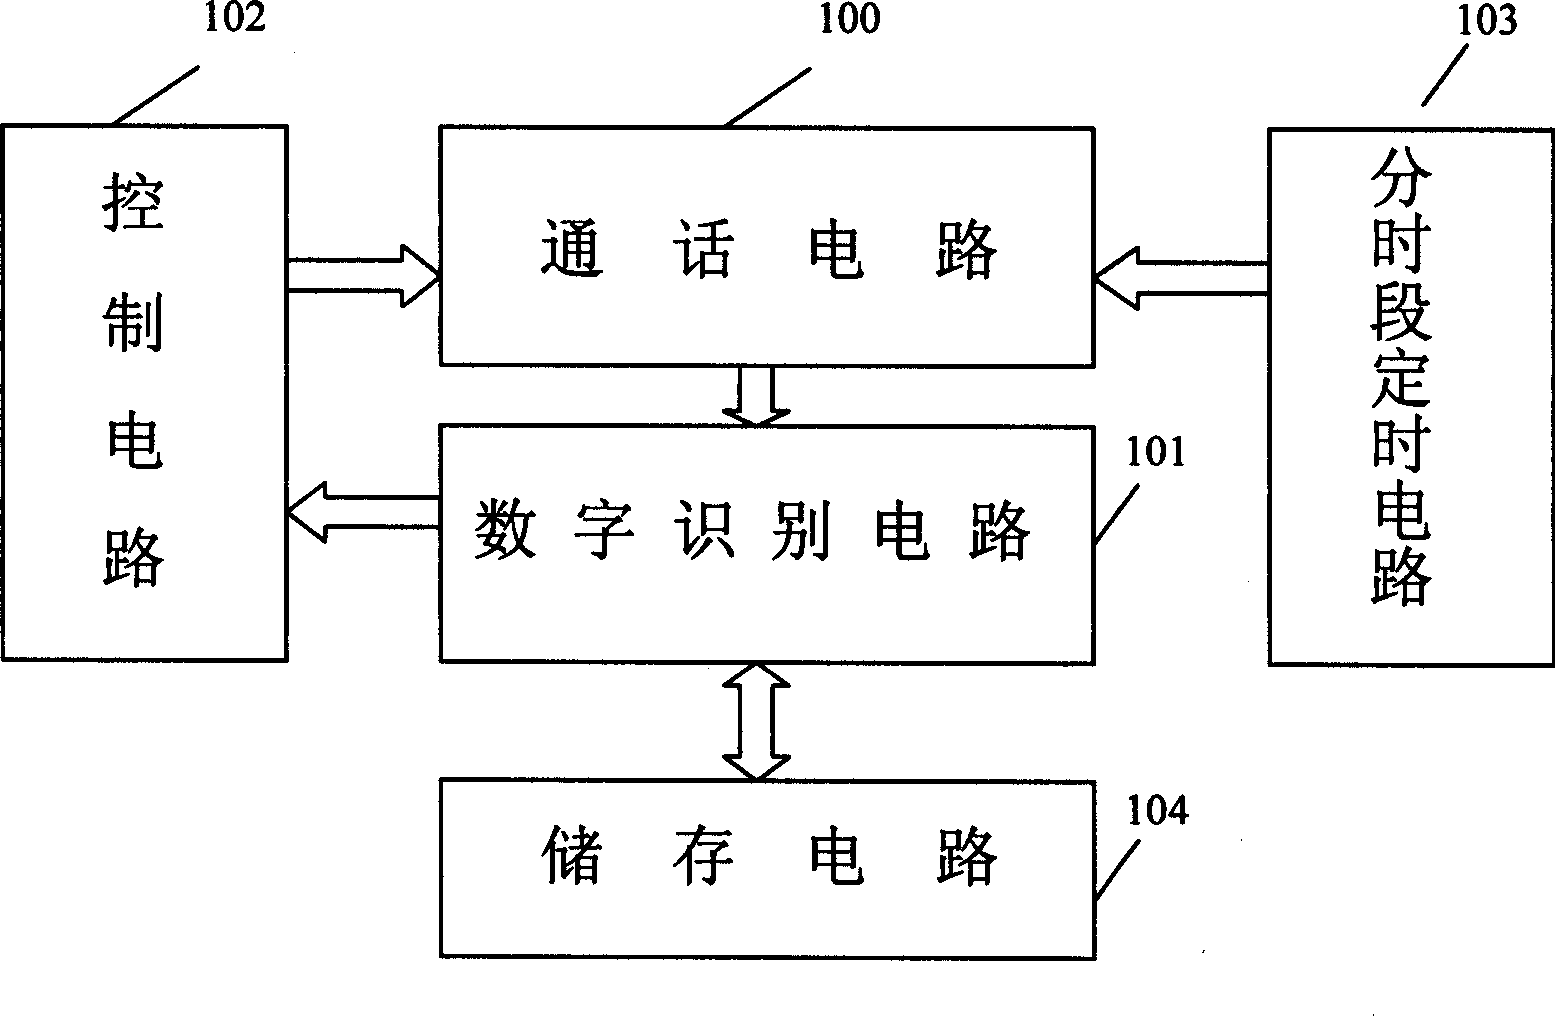 Radio communication terminal and communication network service suitable for juveniles